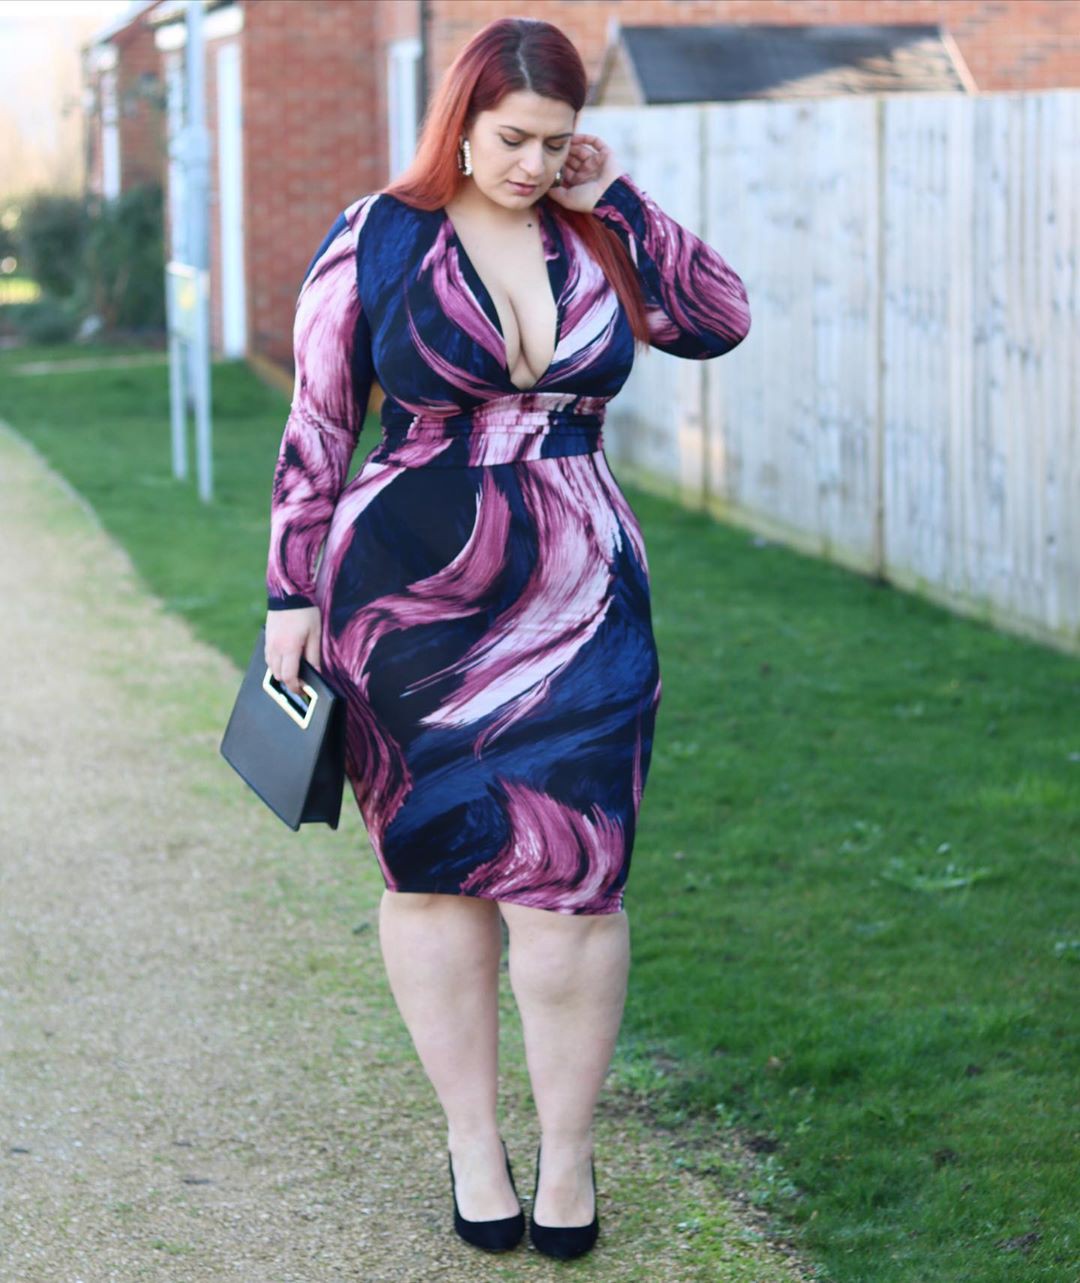 Magenta and purple dress, legs pic, apparel ideas: Hot Plus Size Girls,  Magenta And Purple Outfit  